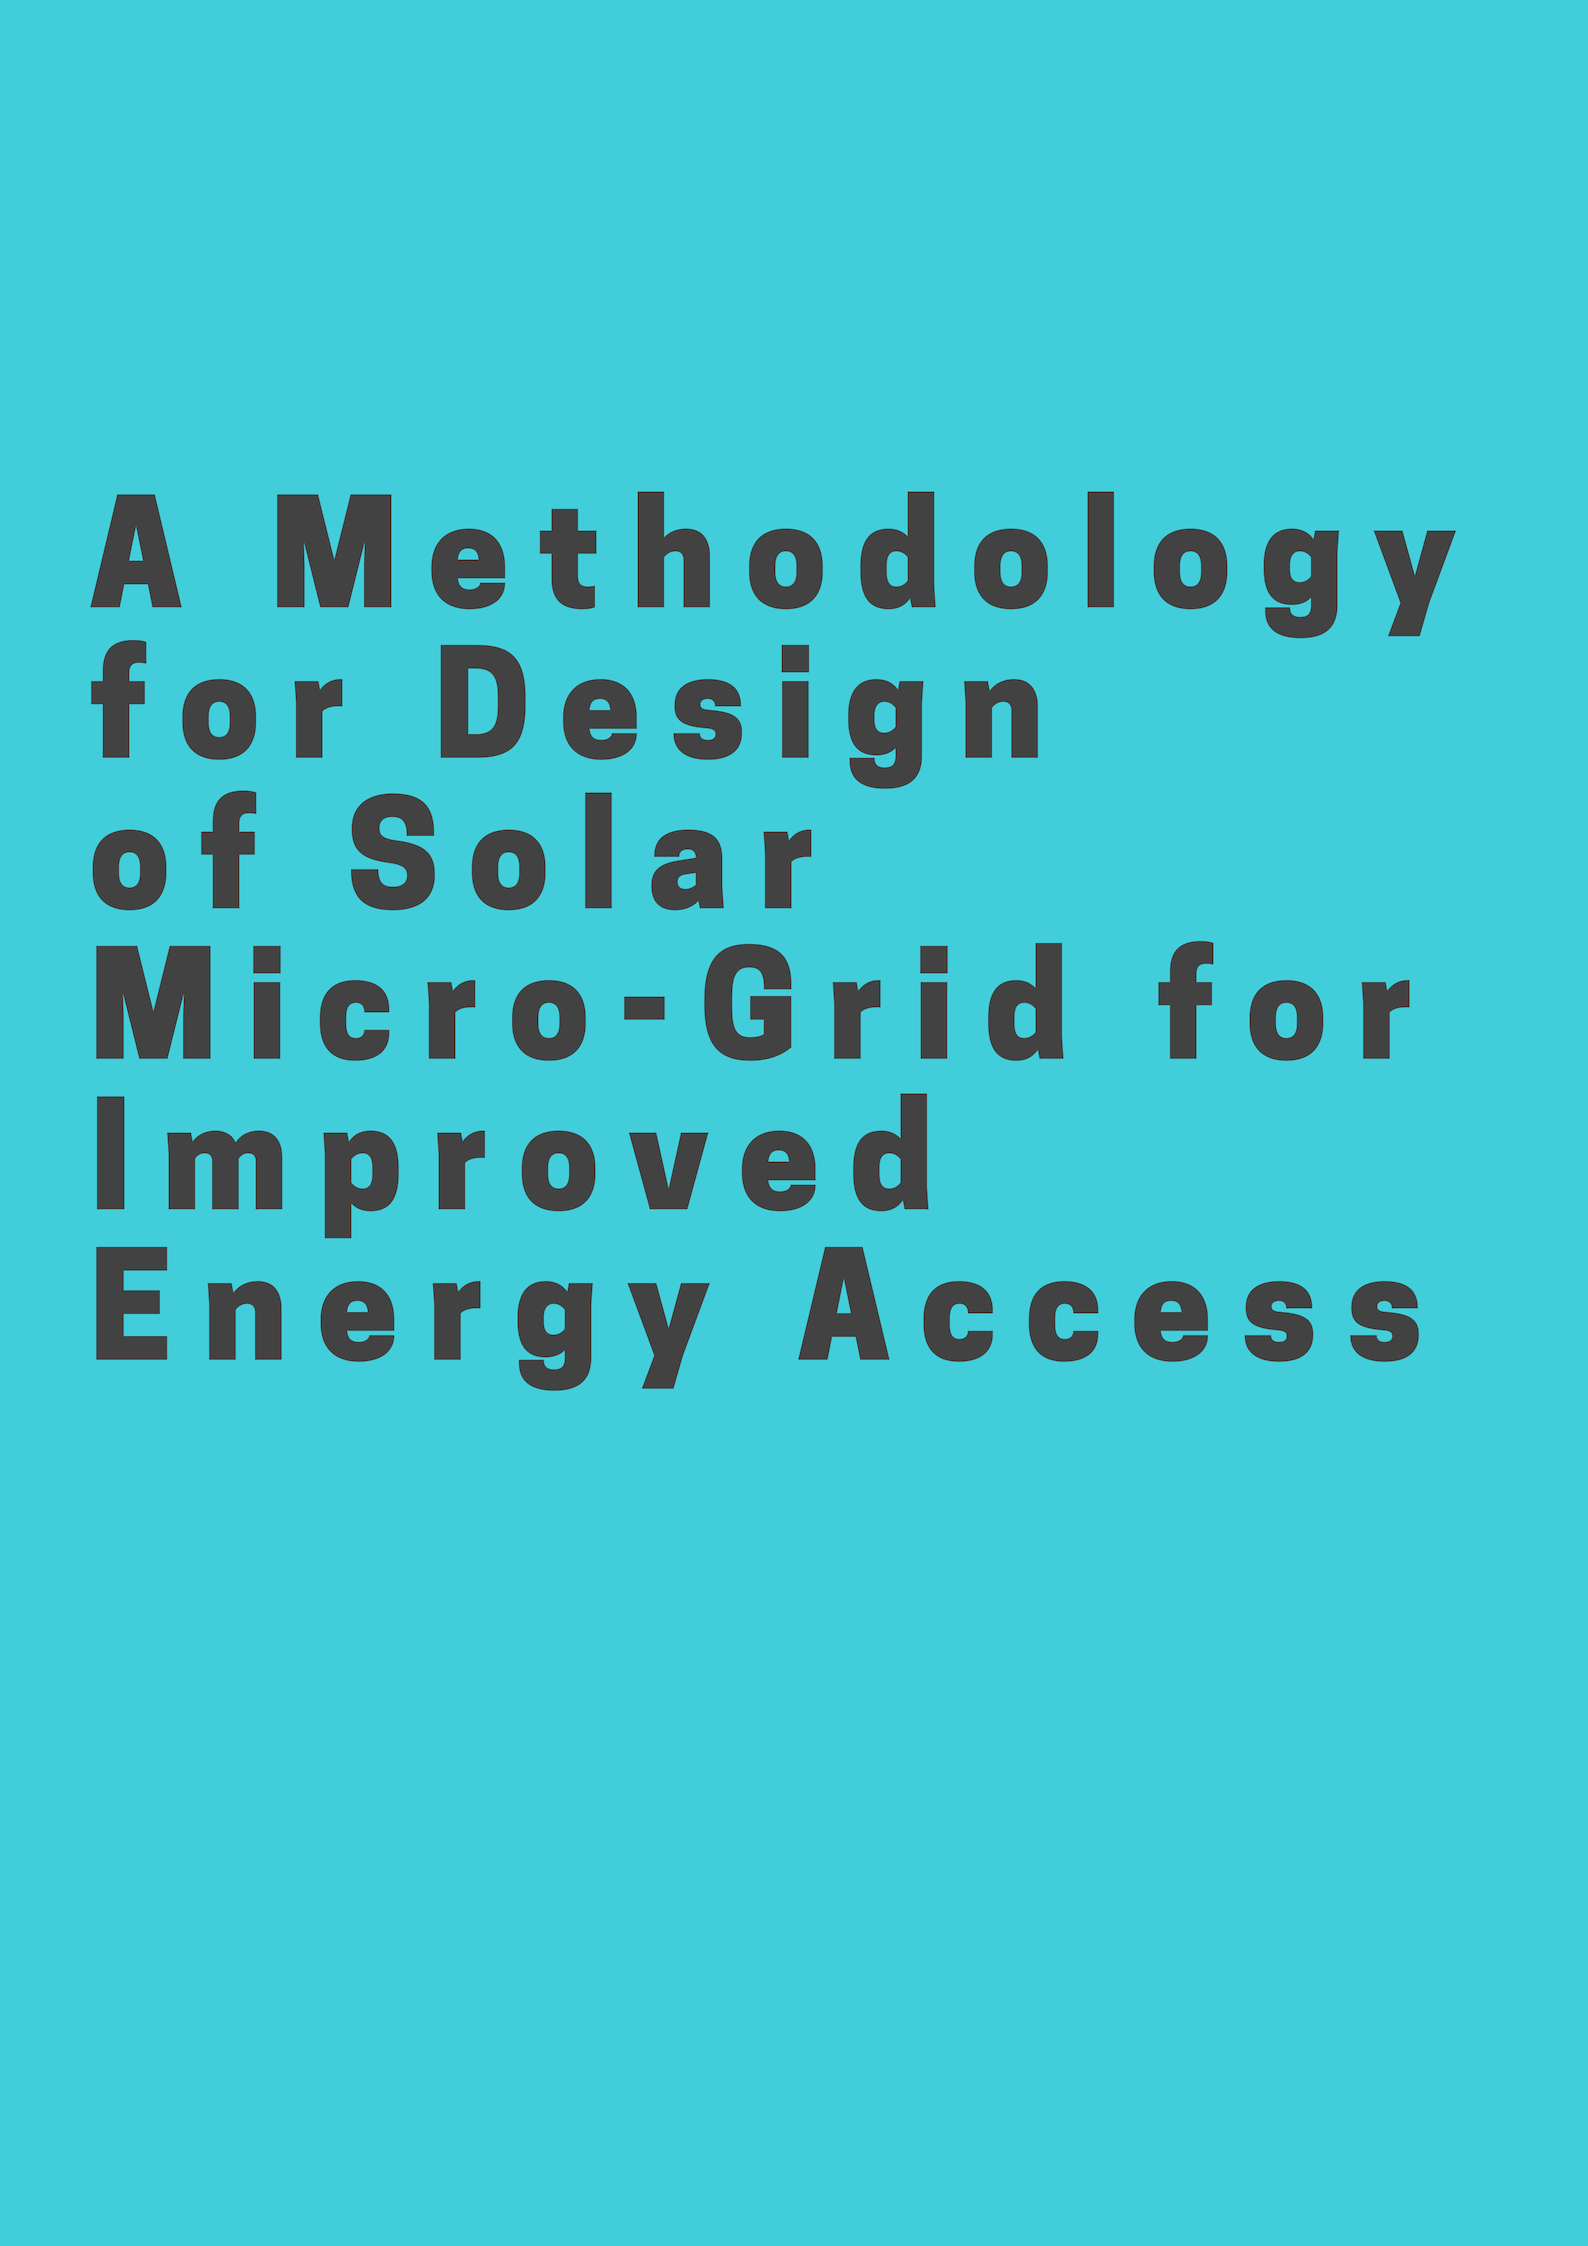 A Methodology for Design of Solar Micro-Grid for Improved Energy Access